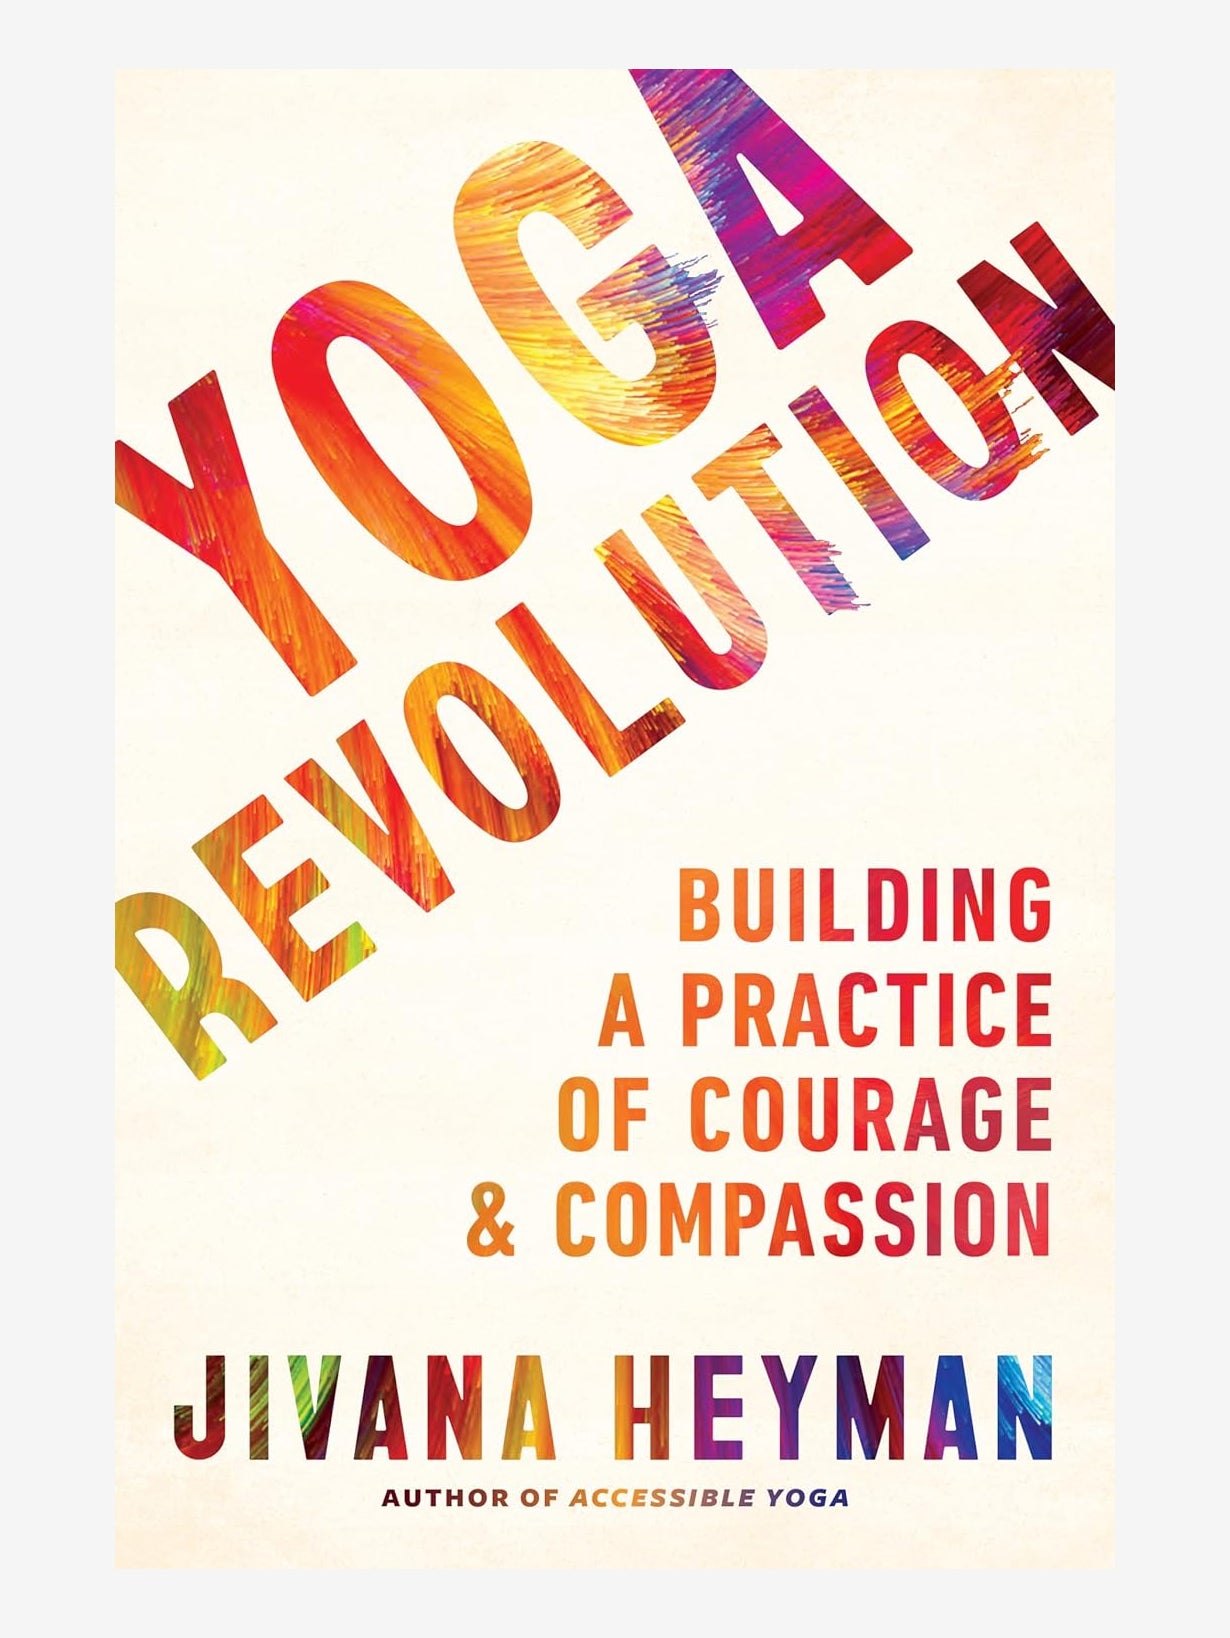 Yoga Revolution: Building a Practice of Courage & Compassion